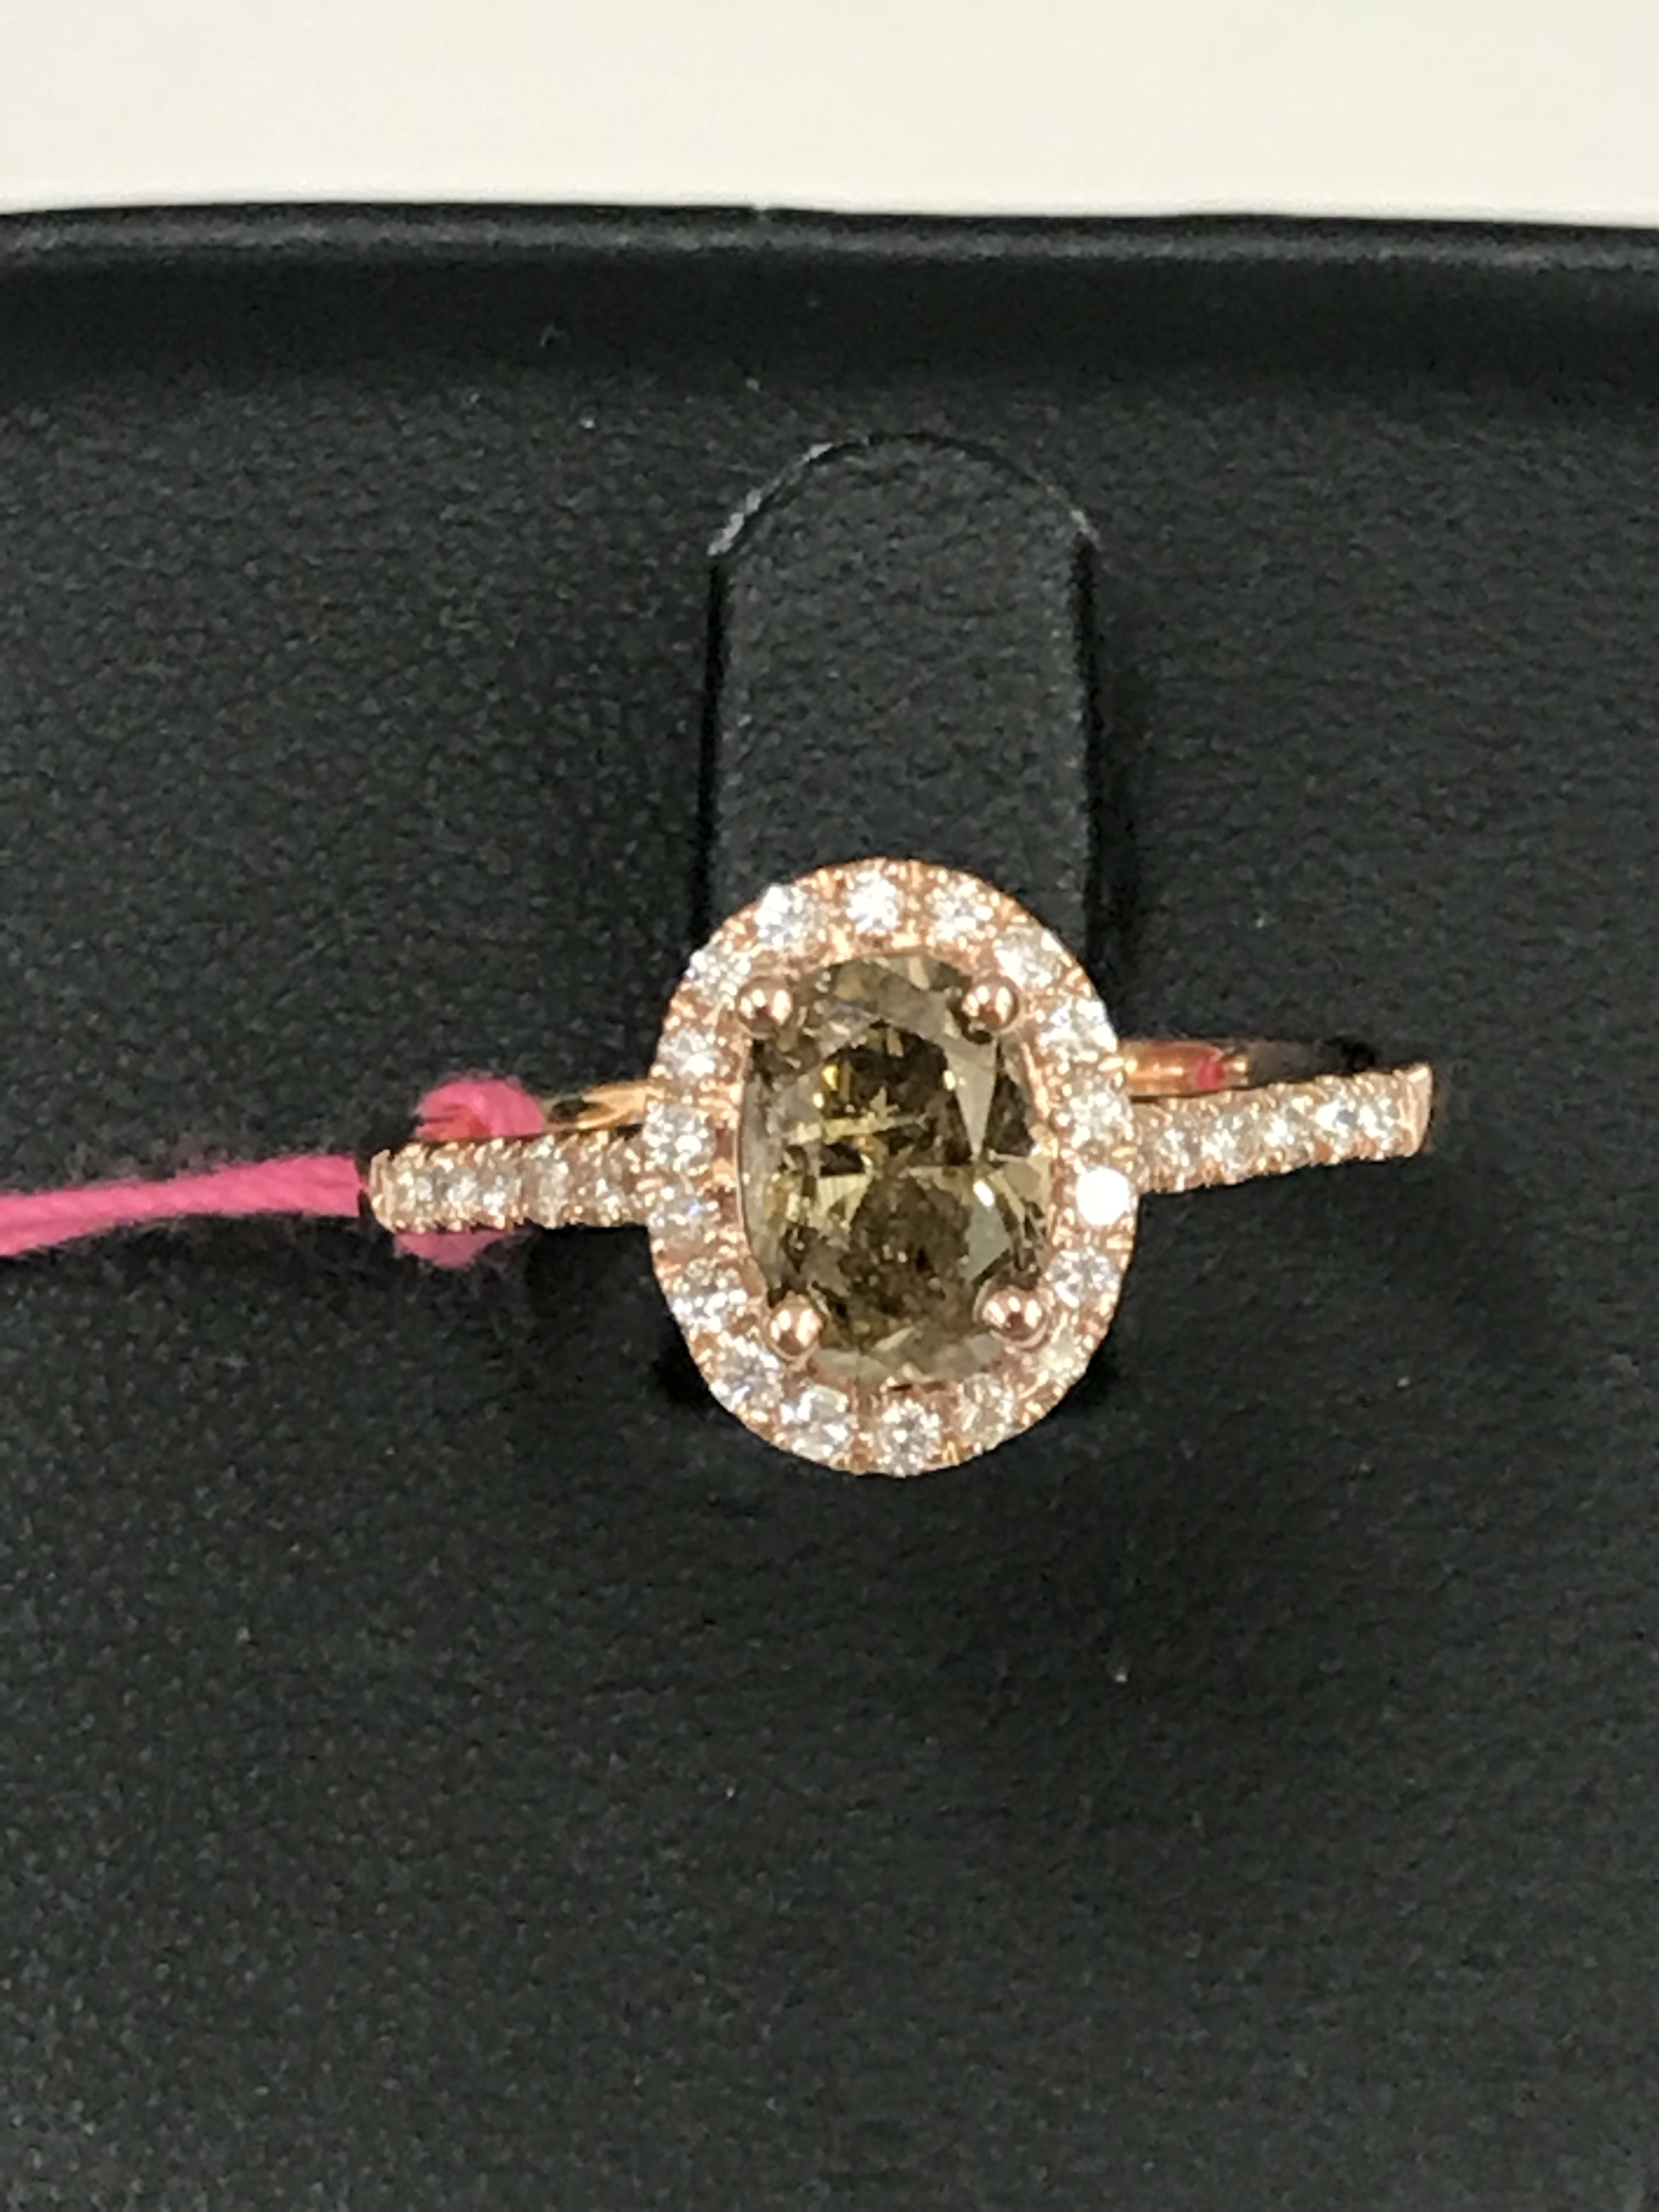 A 1.25ct chocolate diamond ring set in 18ct rose gold